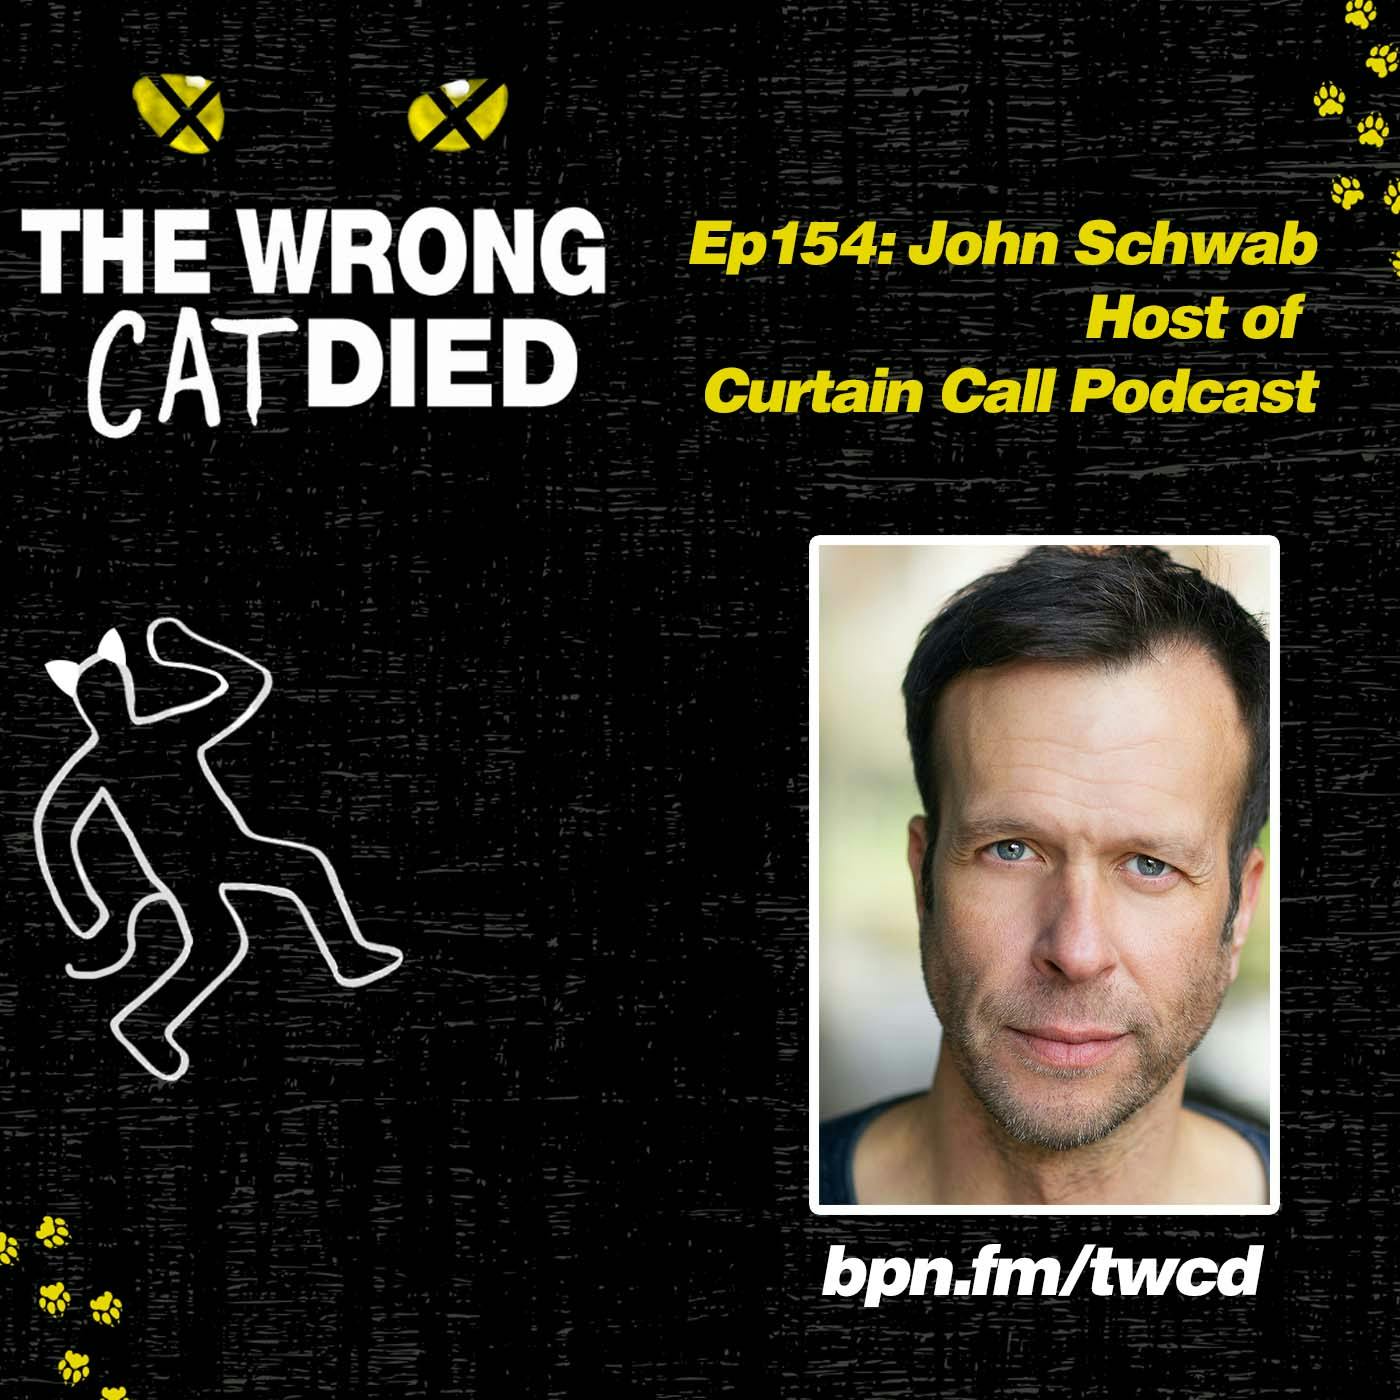 Ep154 - John Schwab, Actor and Host of Curtain Call Podcast